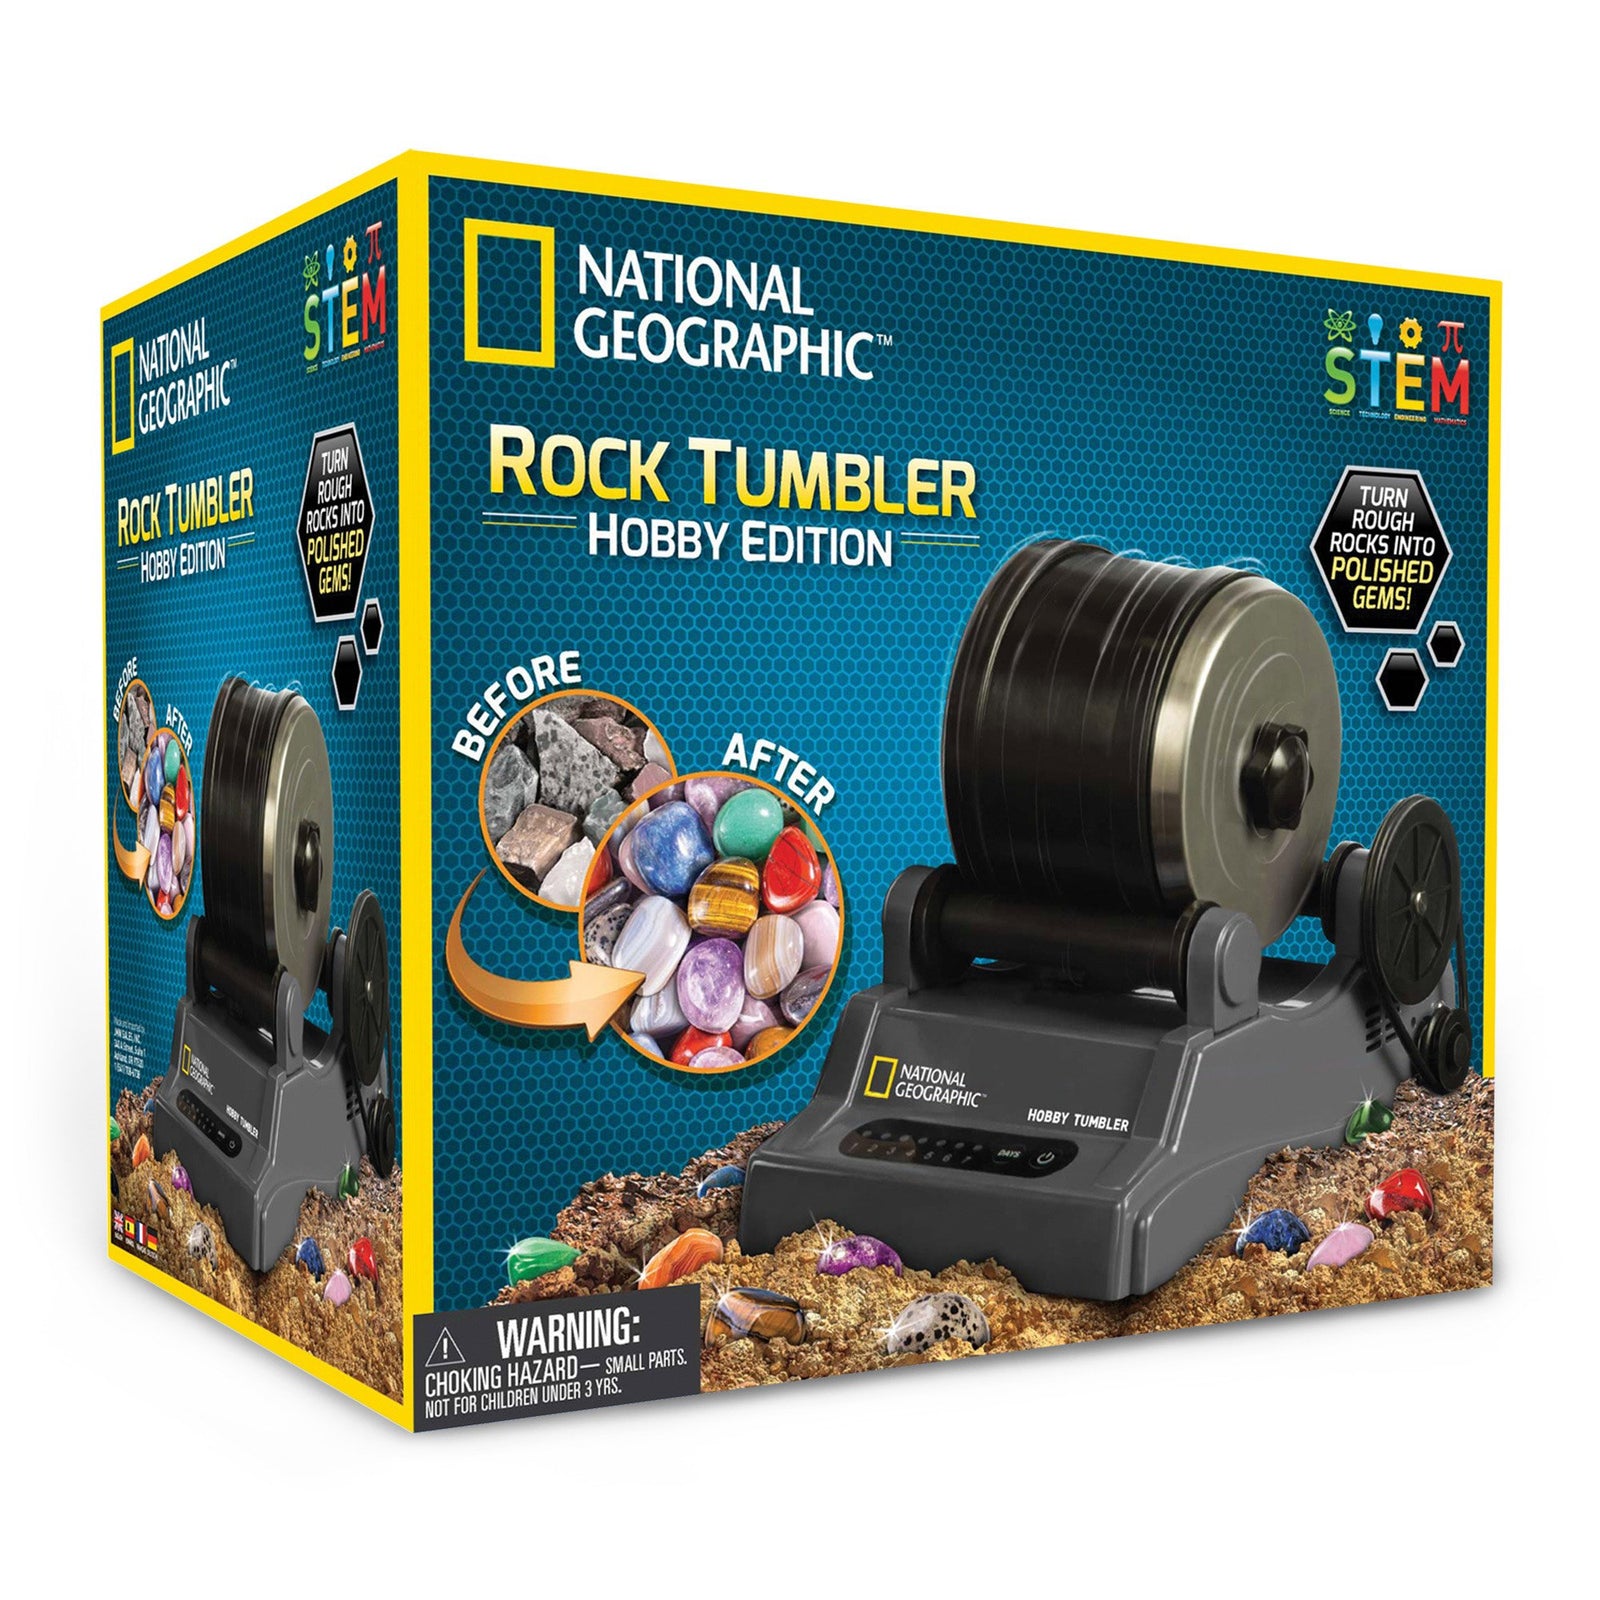 NATIONAL GEOGRAPHIC Hobby Rock Tumbler Kit - Includes Rough Gemstones, 4 Polishing Grits, Jewelry Fastenings, Learning Guide, Great Stem Science Kit